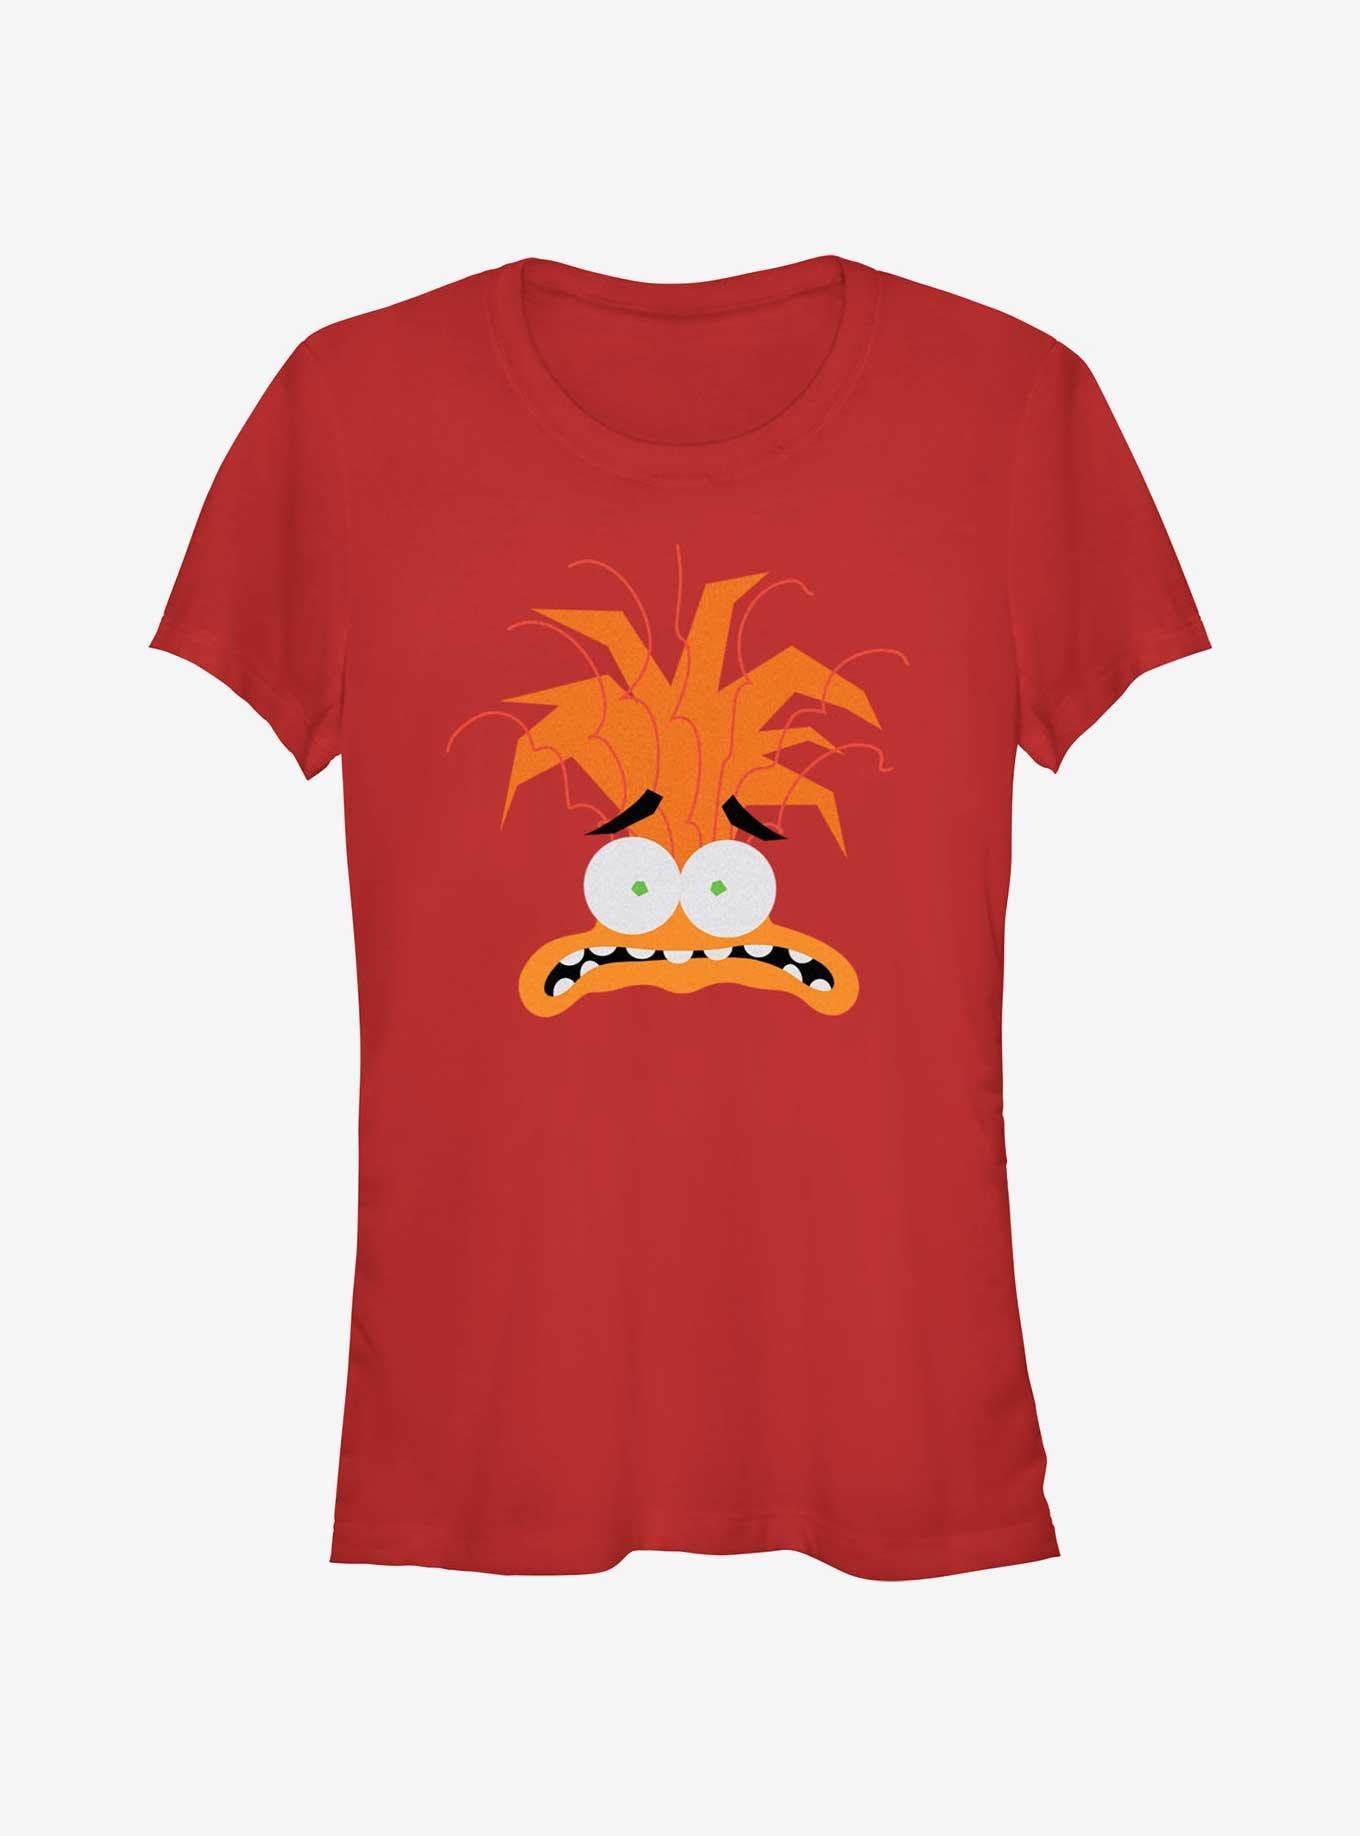 Disney Pixar Inside Out 2 Anxiety Head Girls T-Shirt, RED, hi-res